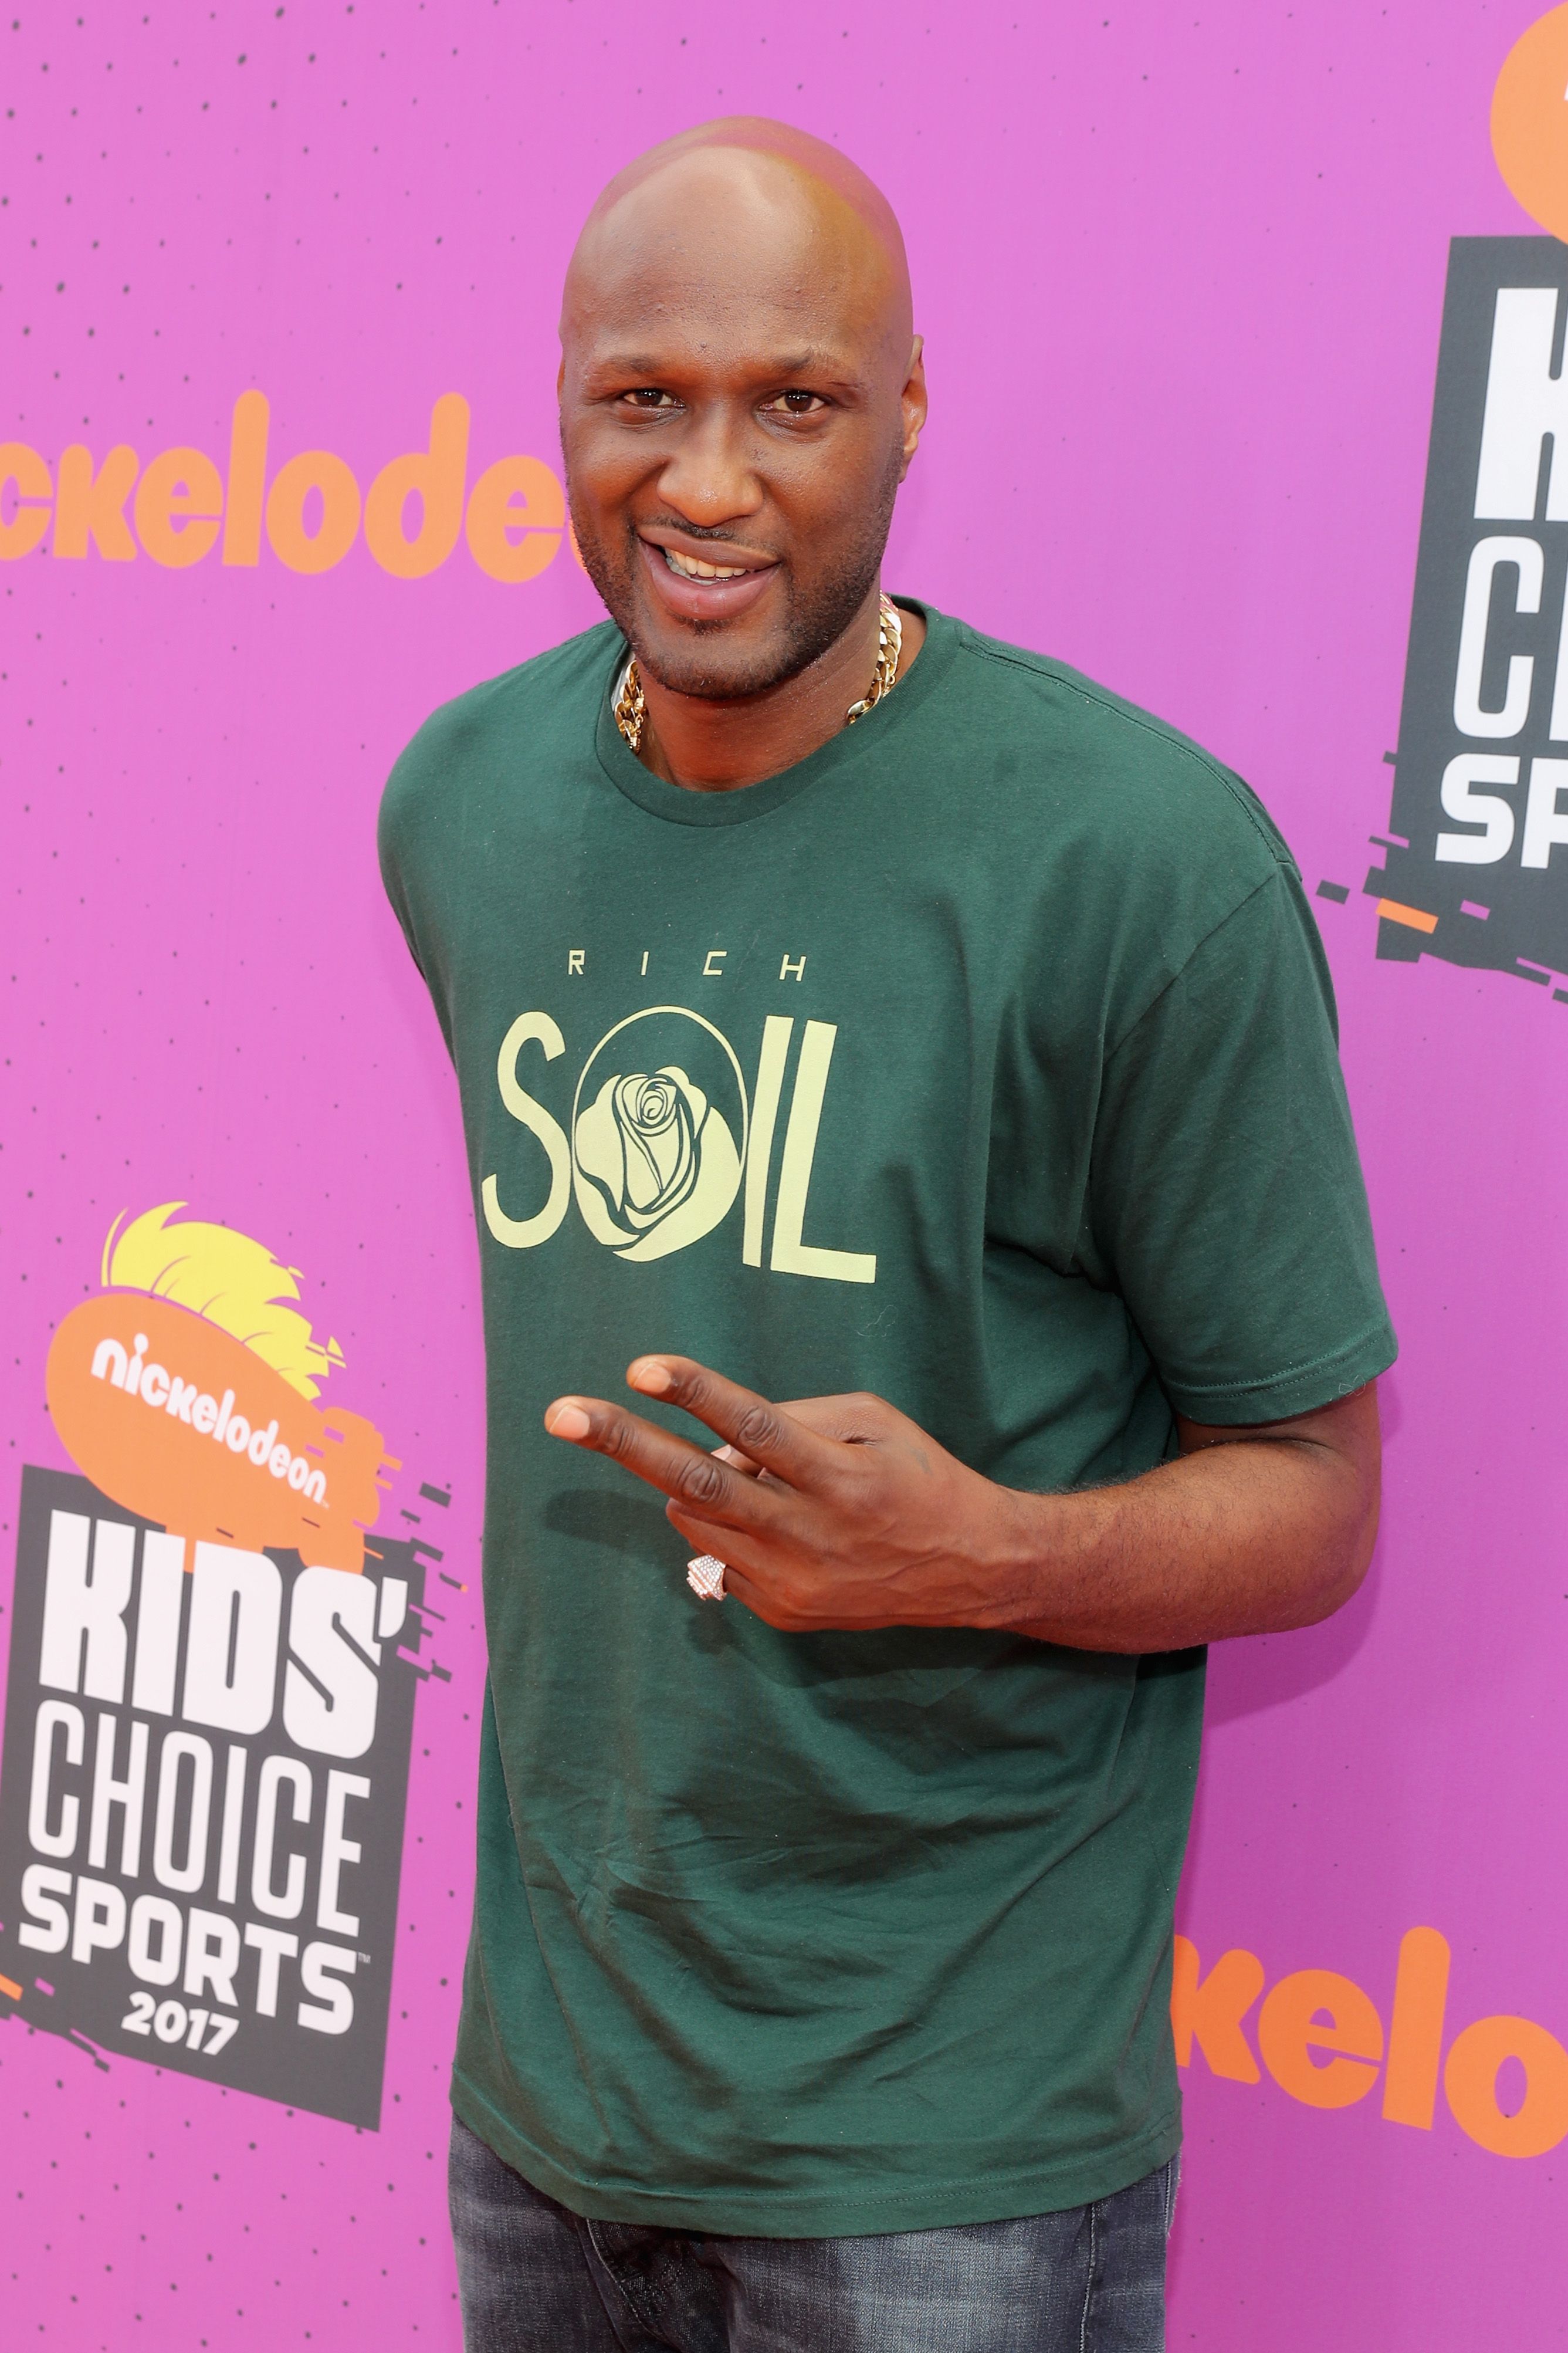 Lamar Odom during the Nickelodeon Kids' Choice Sports Awards 2017 at Pauley Pavilion on July 13, 2017 in Los Angeles, California. | Source: Getty Images